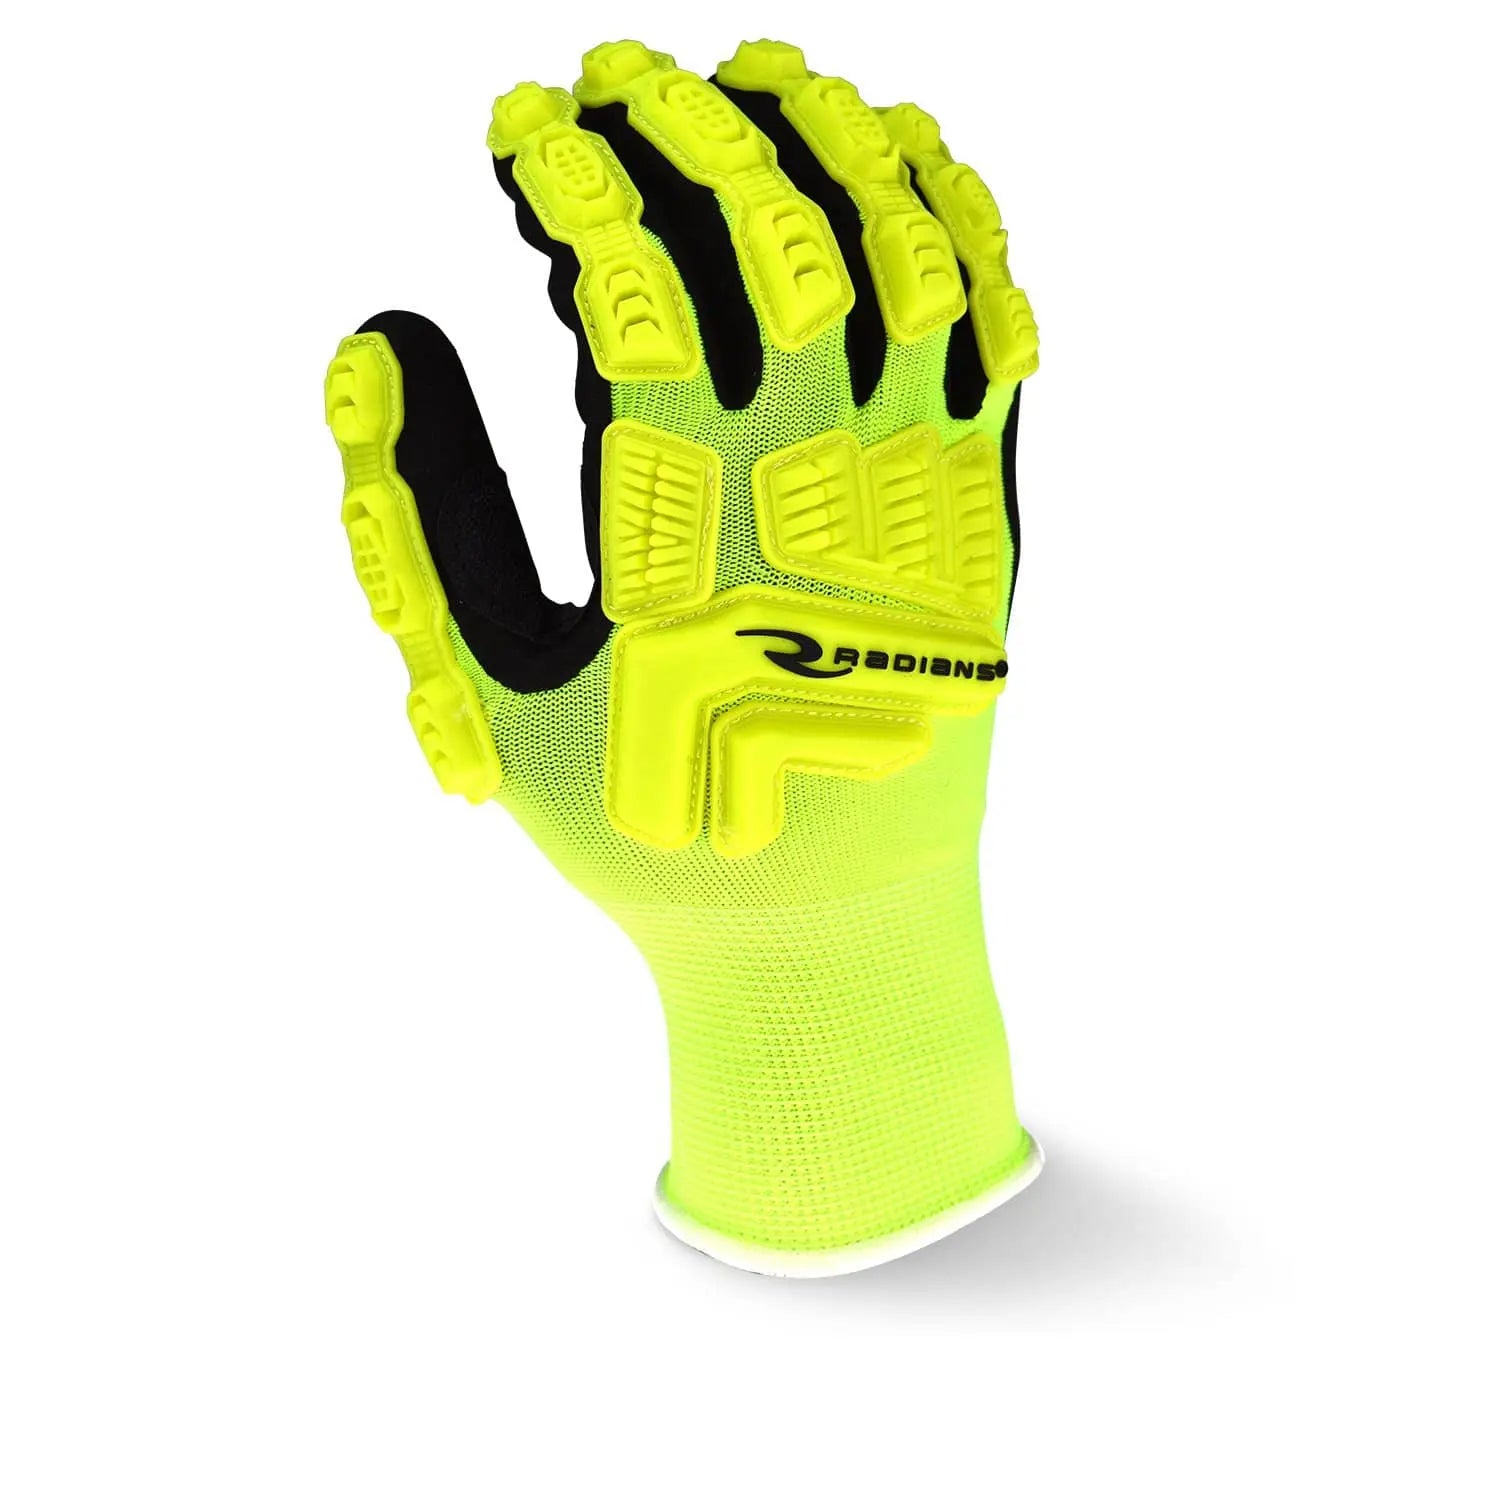 RADIANS - High Visibility Work Glove with TPR - Becker Safety and Supply